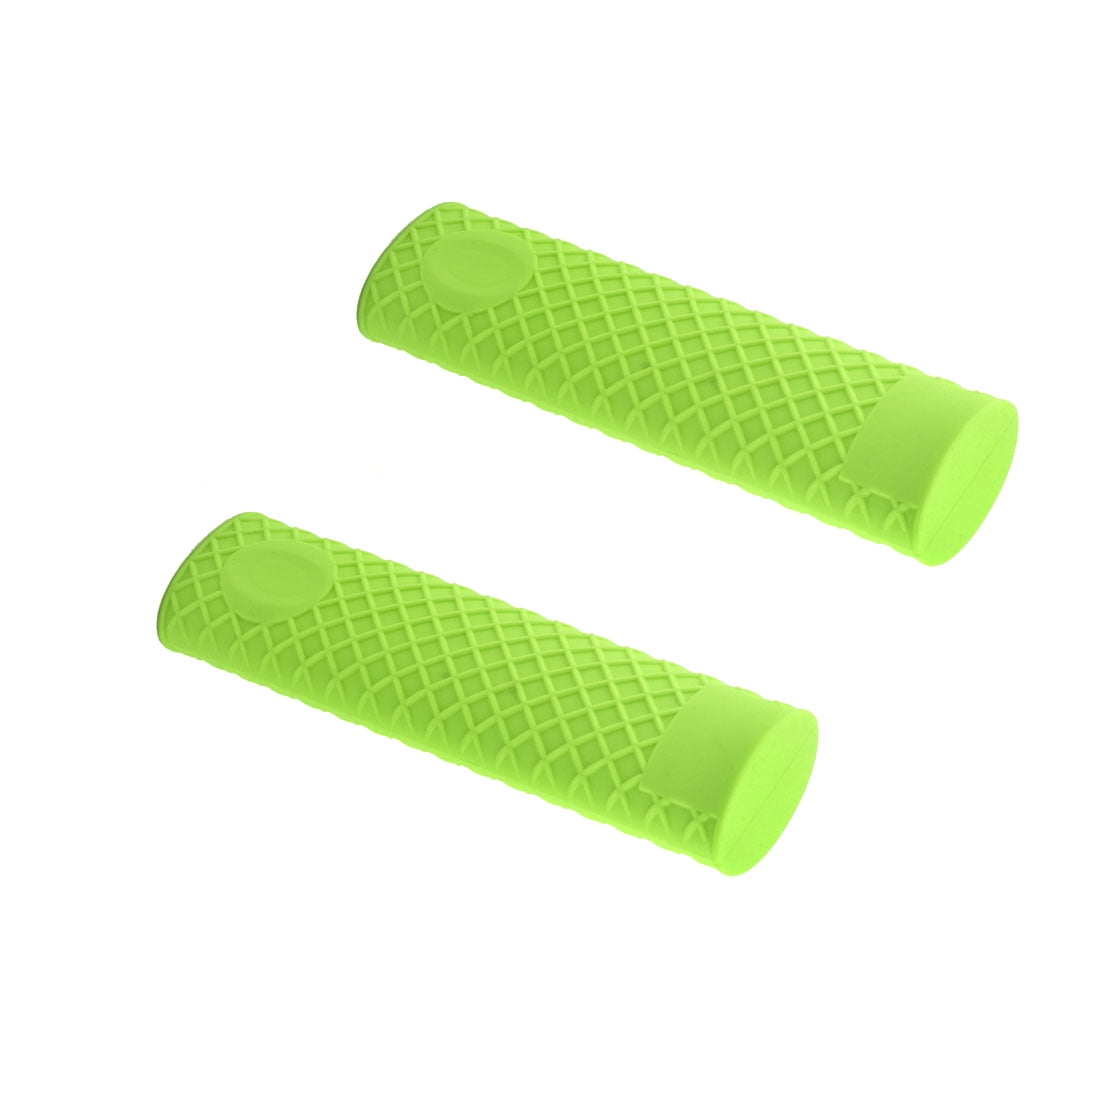 Silicone Kitchen Utensil Pot Pan Handle Holder Sleeve Cover Waffle Grip 